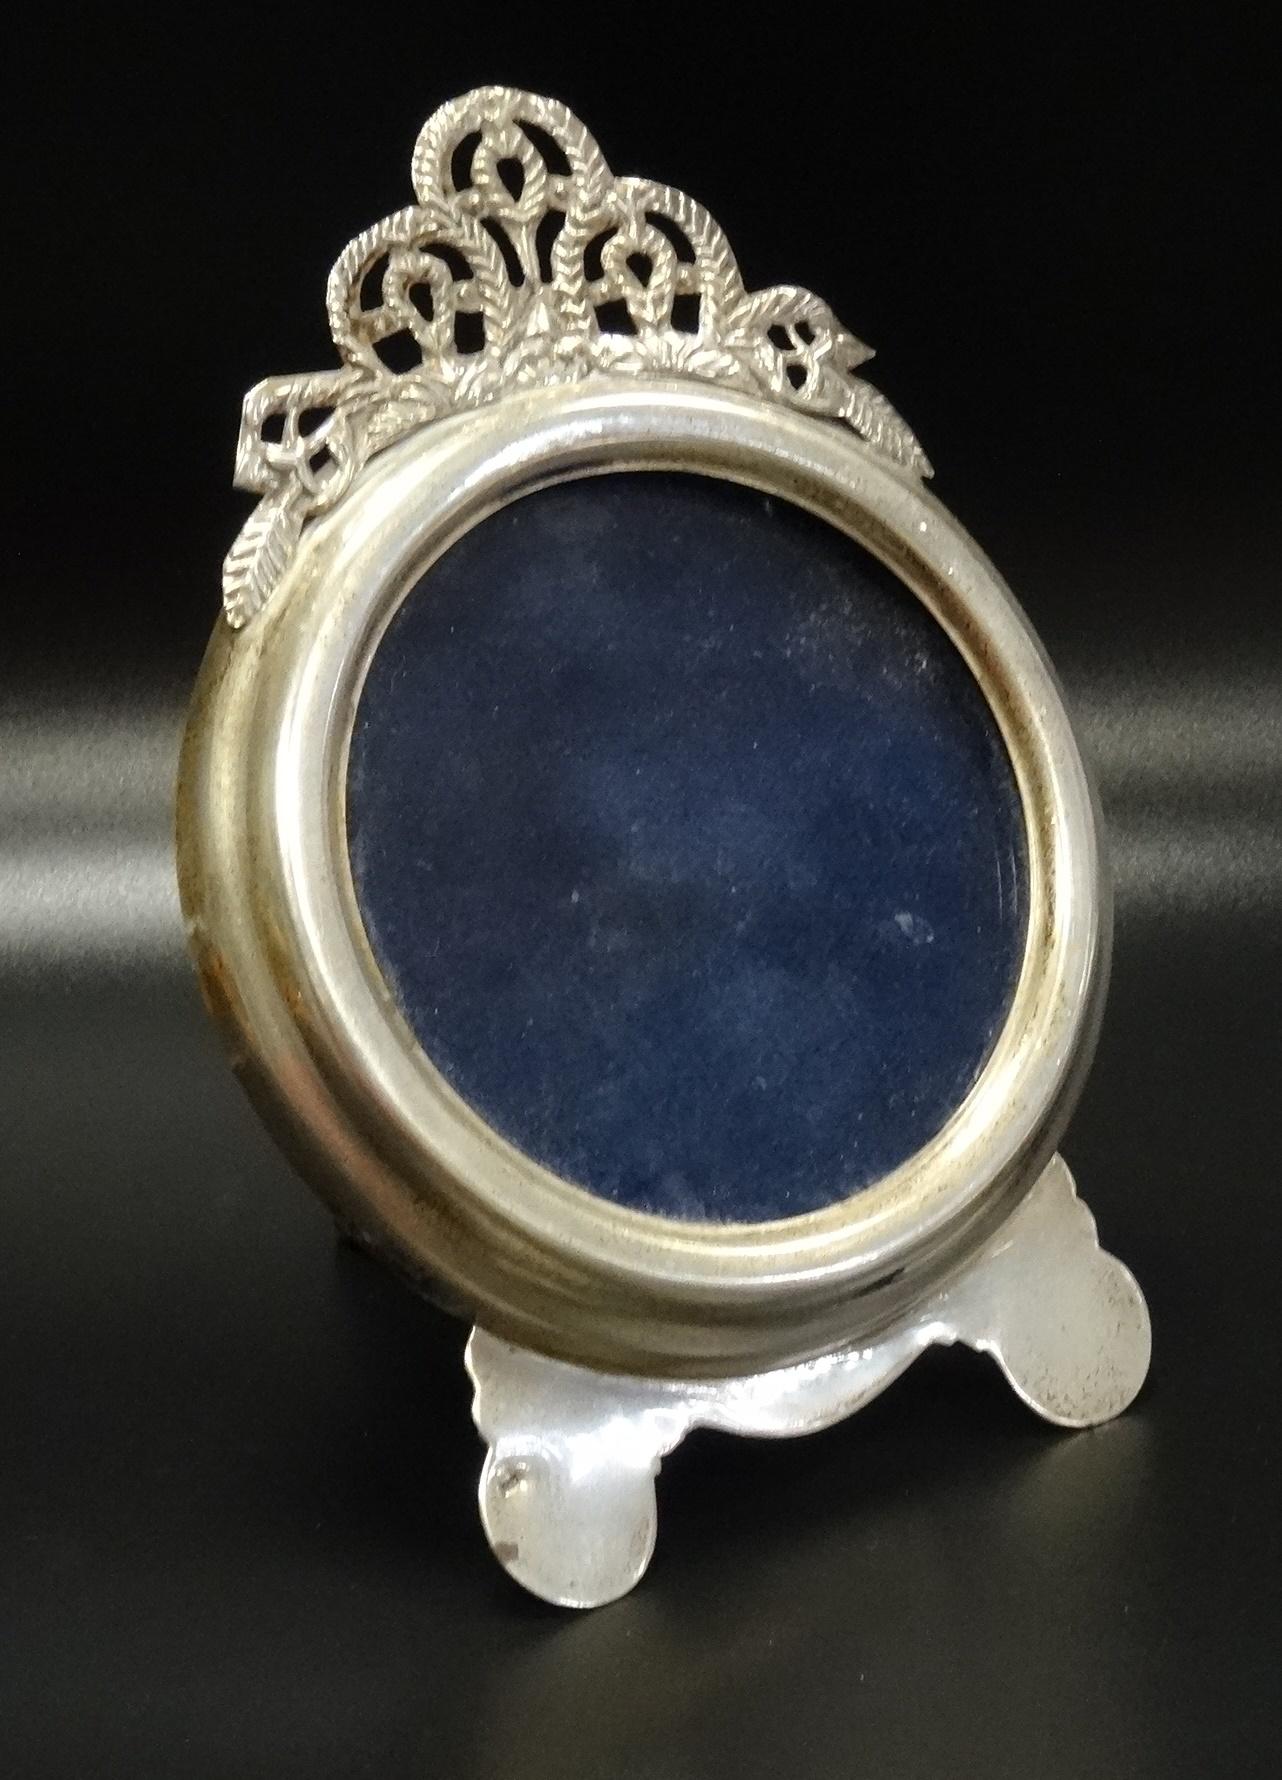 SILVER PHOTOGRAPH FRAME the circular frame below a decorative pierced top section, on easel support,